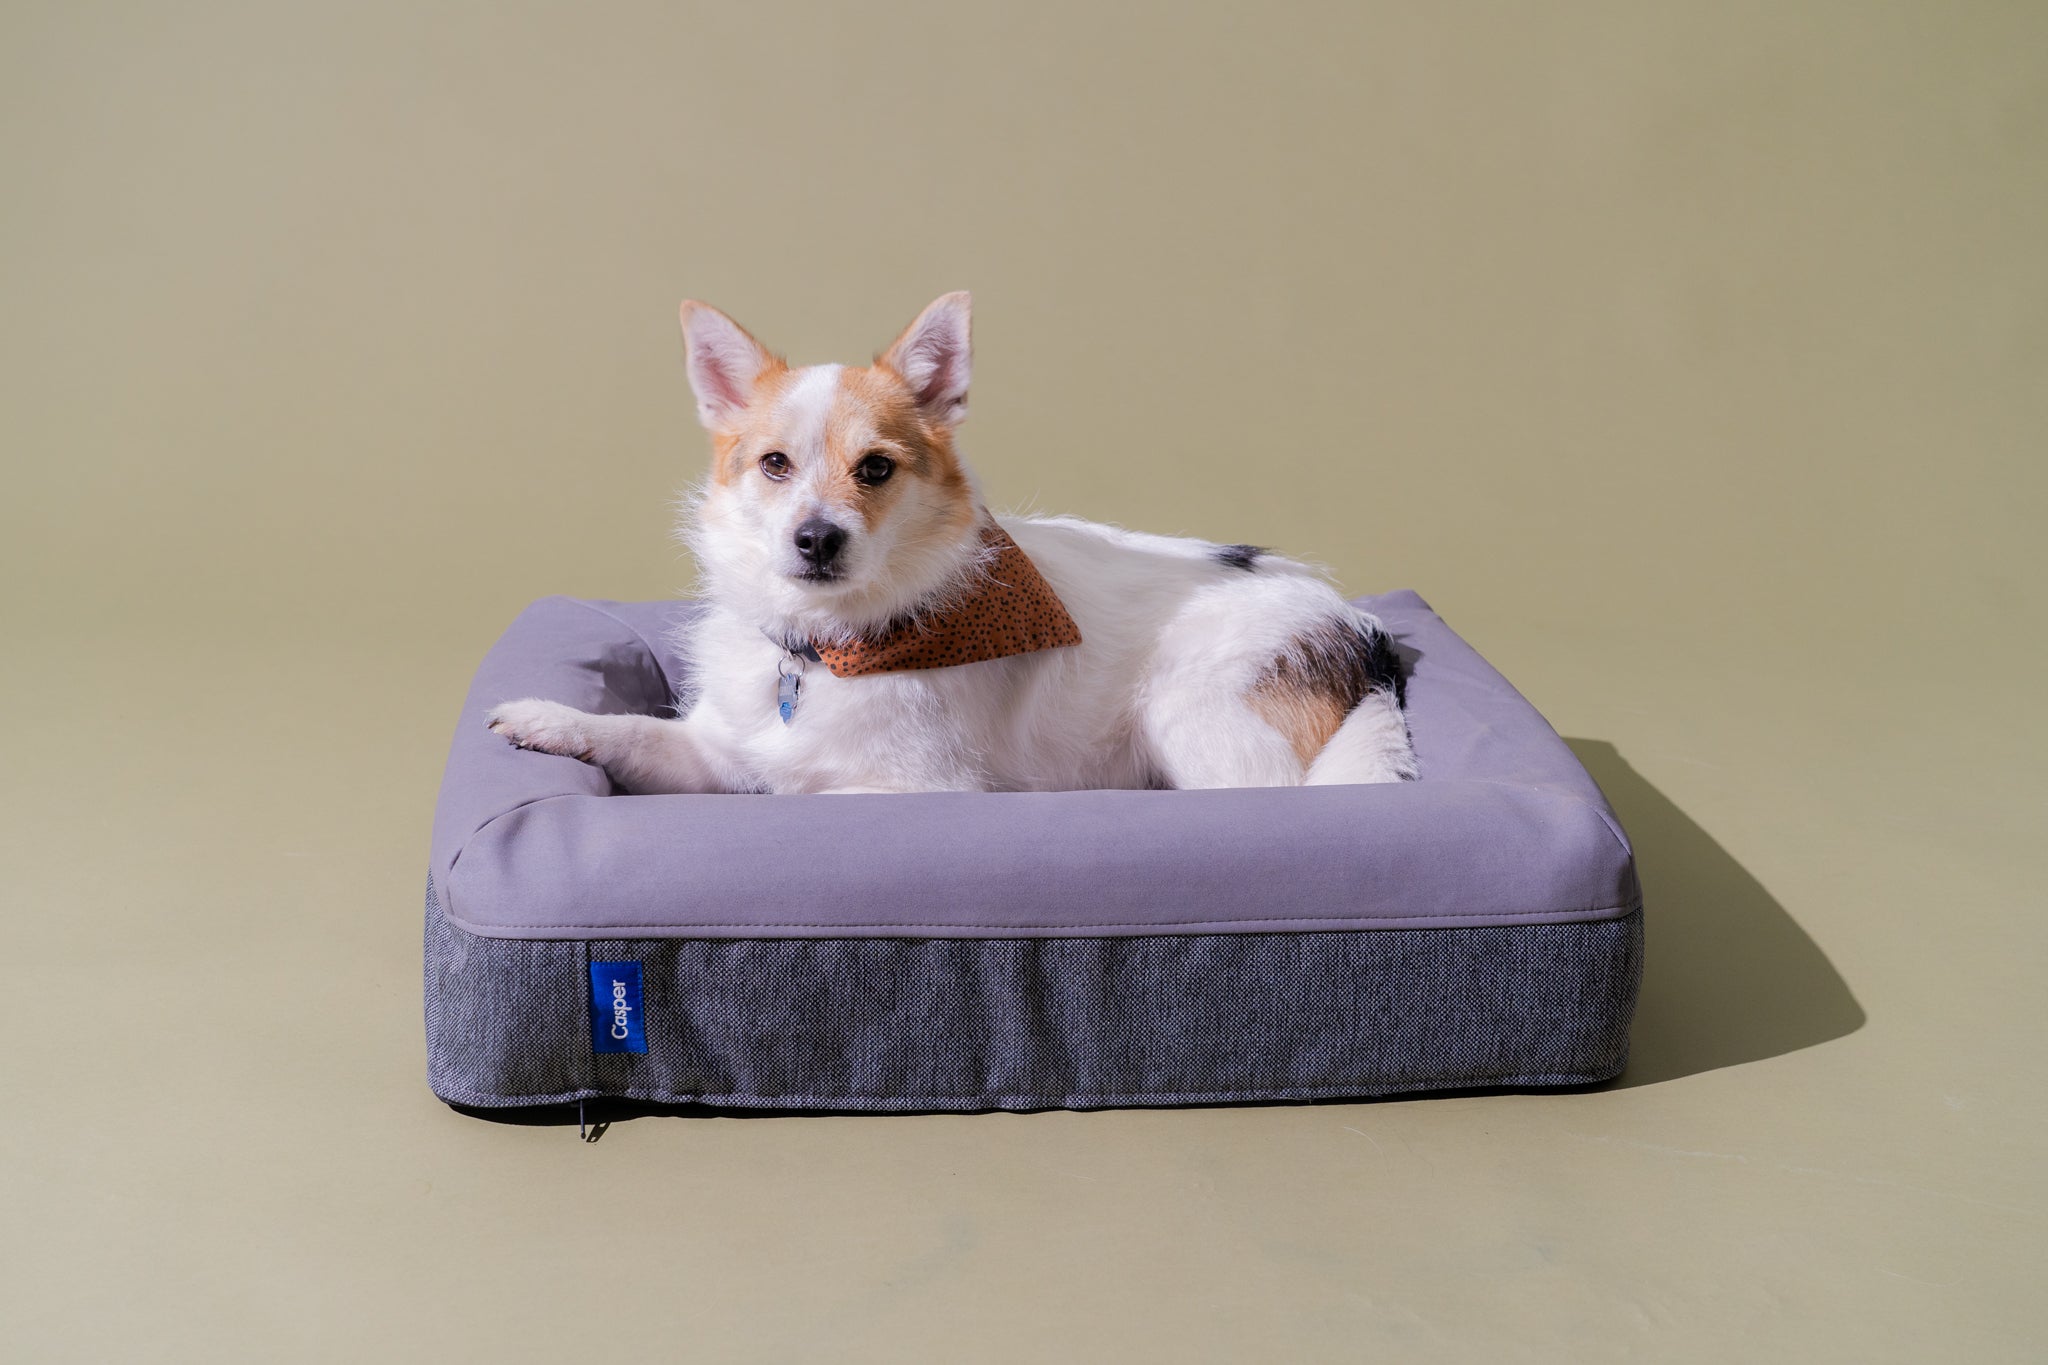 Reasons Why Dogs And Cats May Chew Or Scratch An Air Mattress